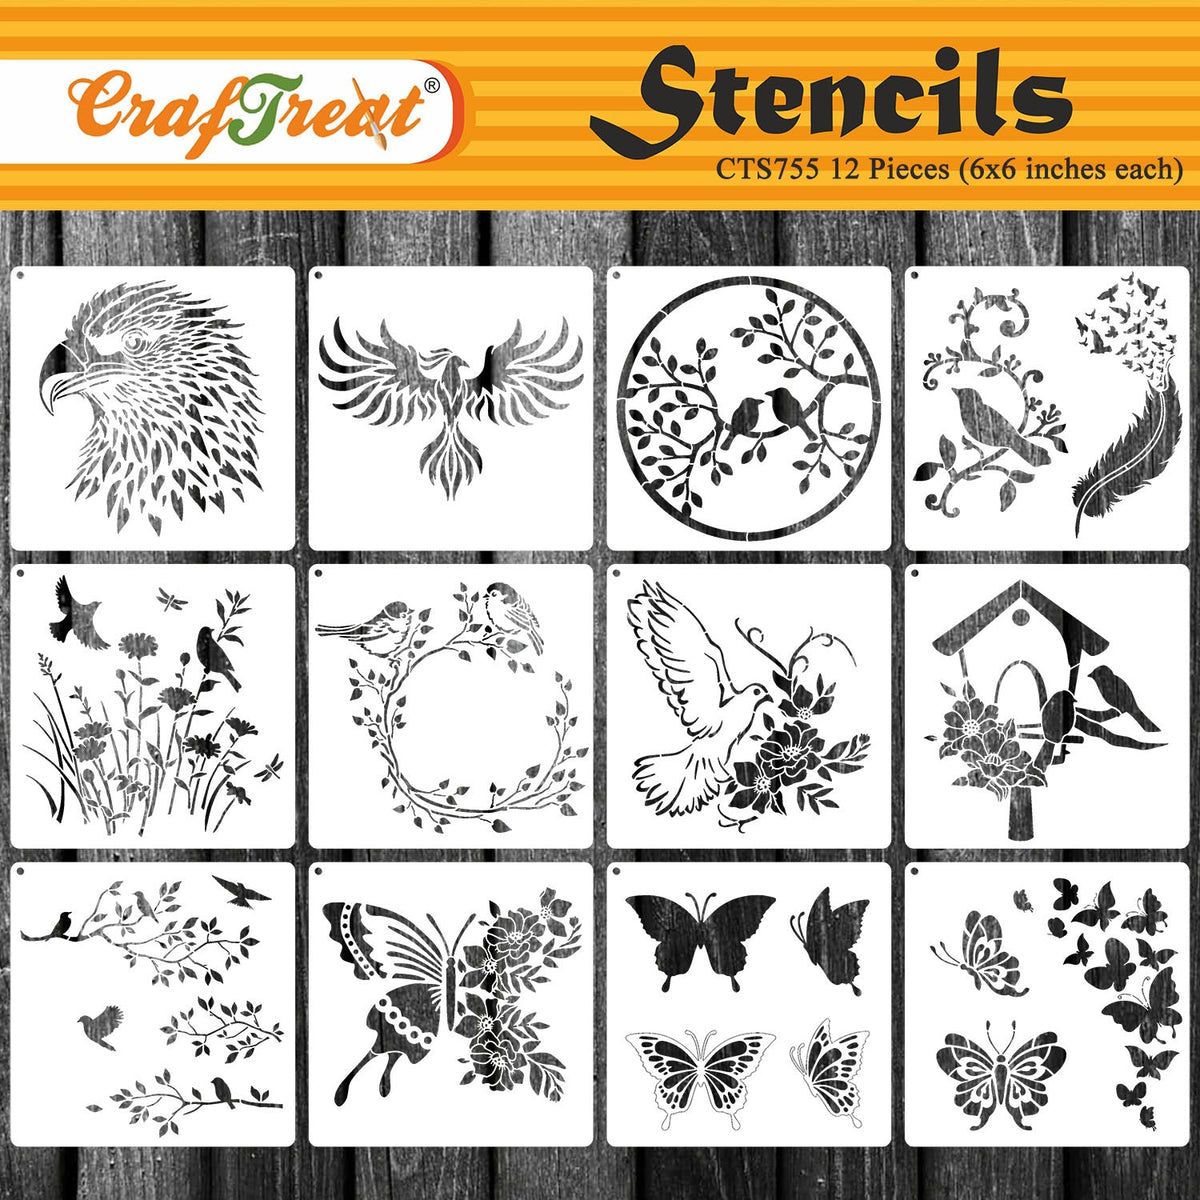  CrafTreat Reusable Wildflower Stencils for Painting on Wood,  Canvas, Paper, Fabric, Floor, Wall and Tile - Wild Flower Stencils - 6x6  Inch DIY Art and Craft Stencils for Painting Flowers 